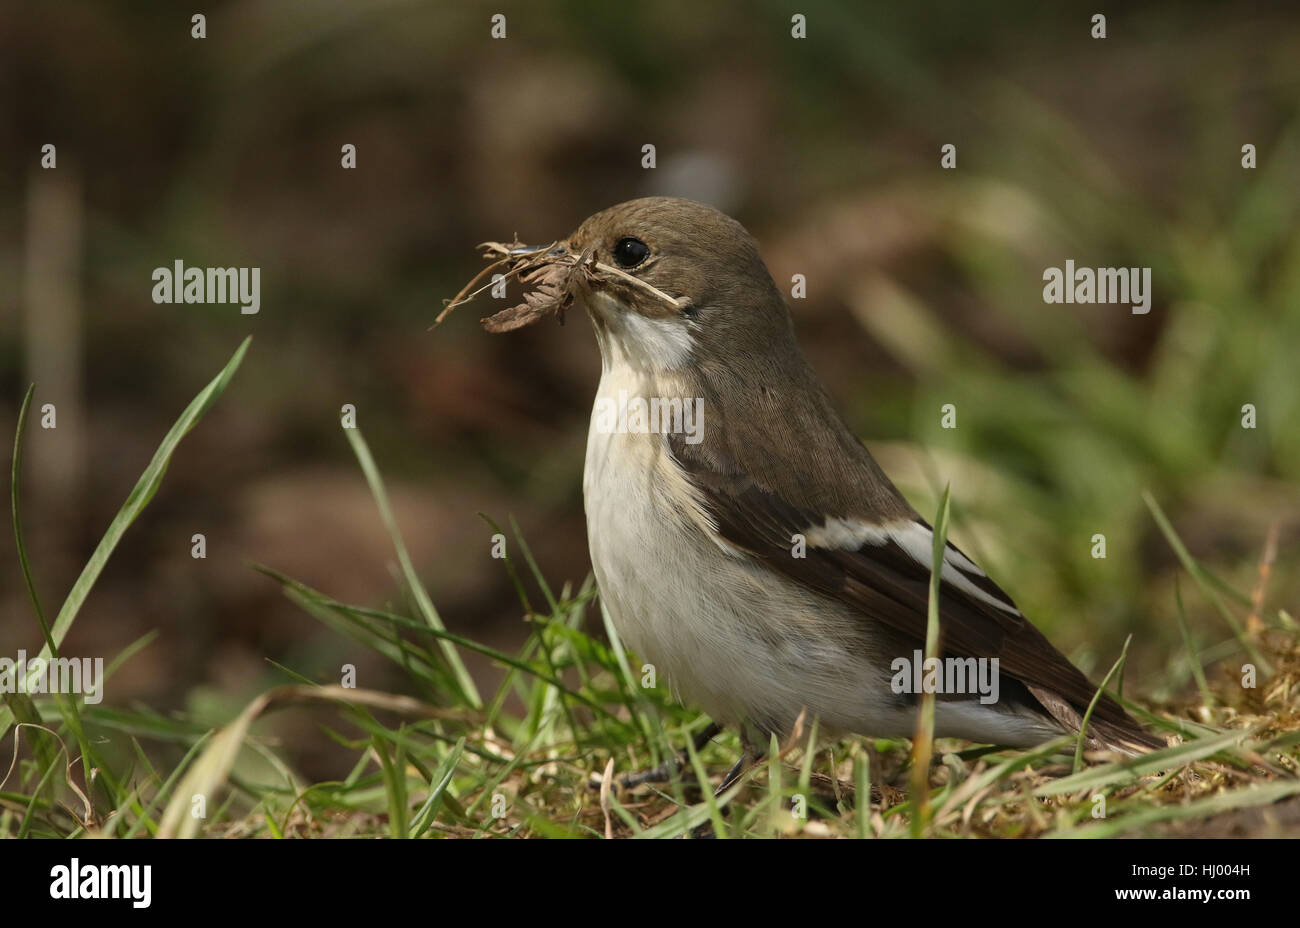 A female Pied Flycatcher (Ficedula hypoleuca) standing in the grass with nesting material in its beak. Stock Photo